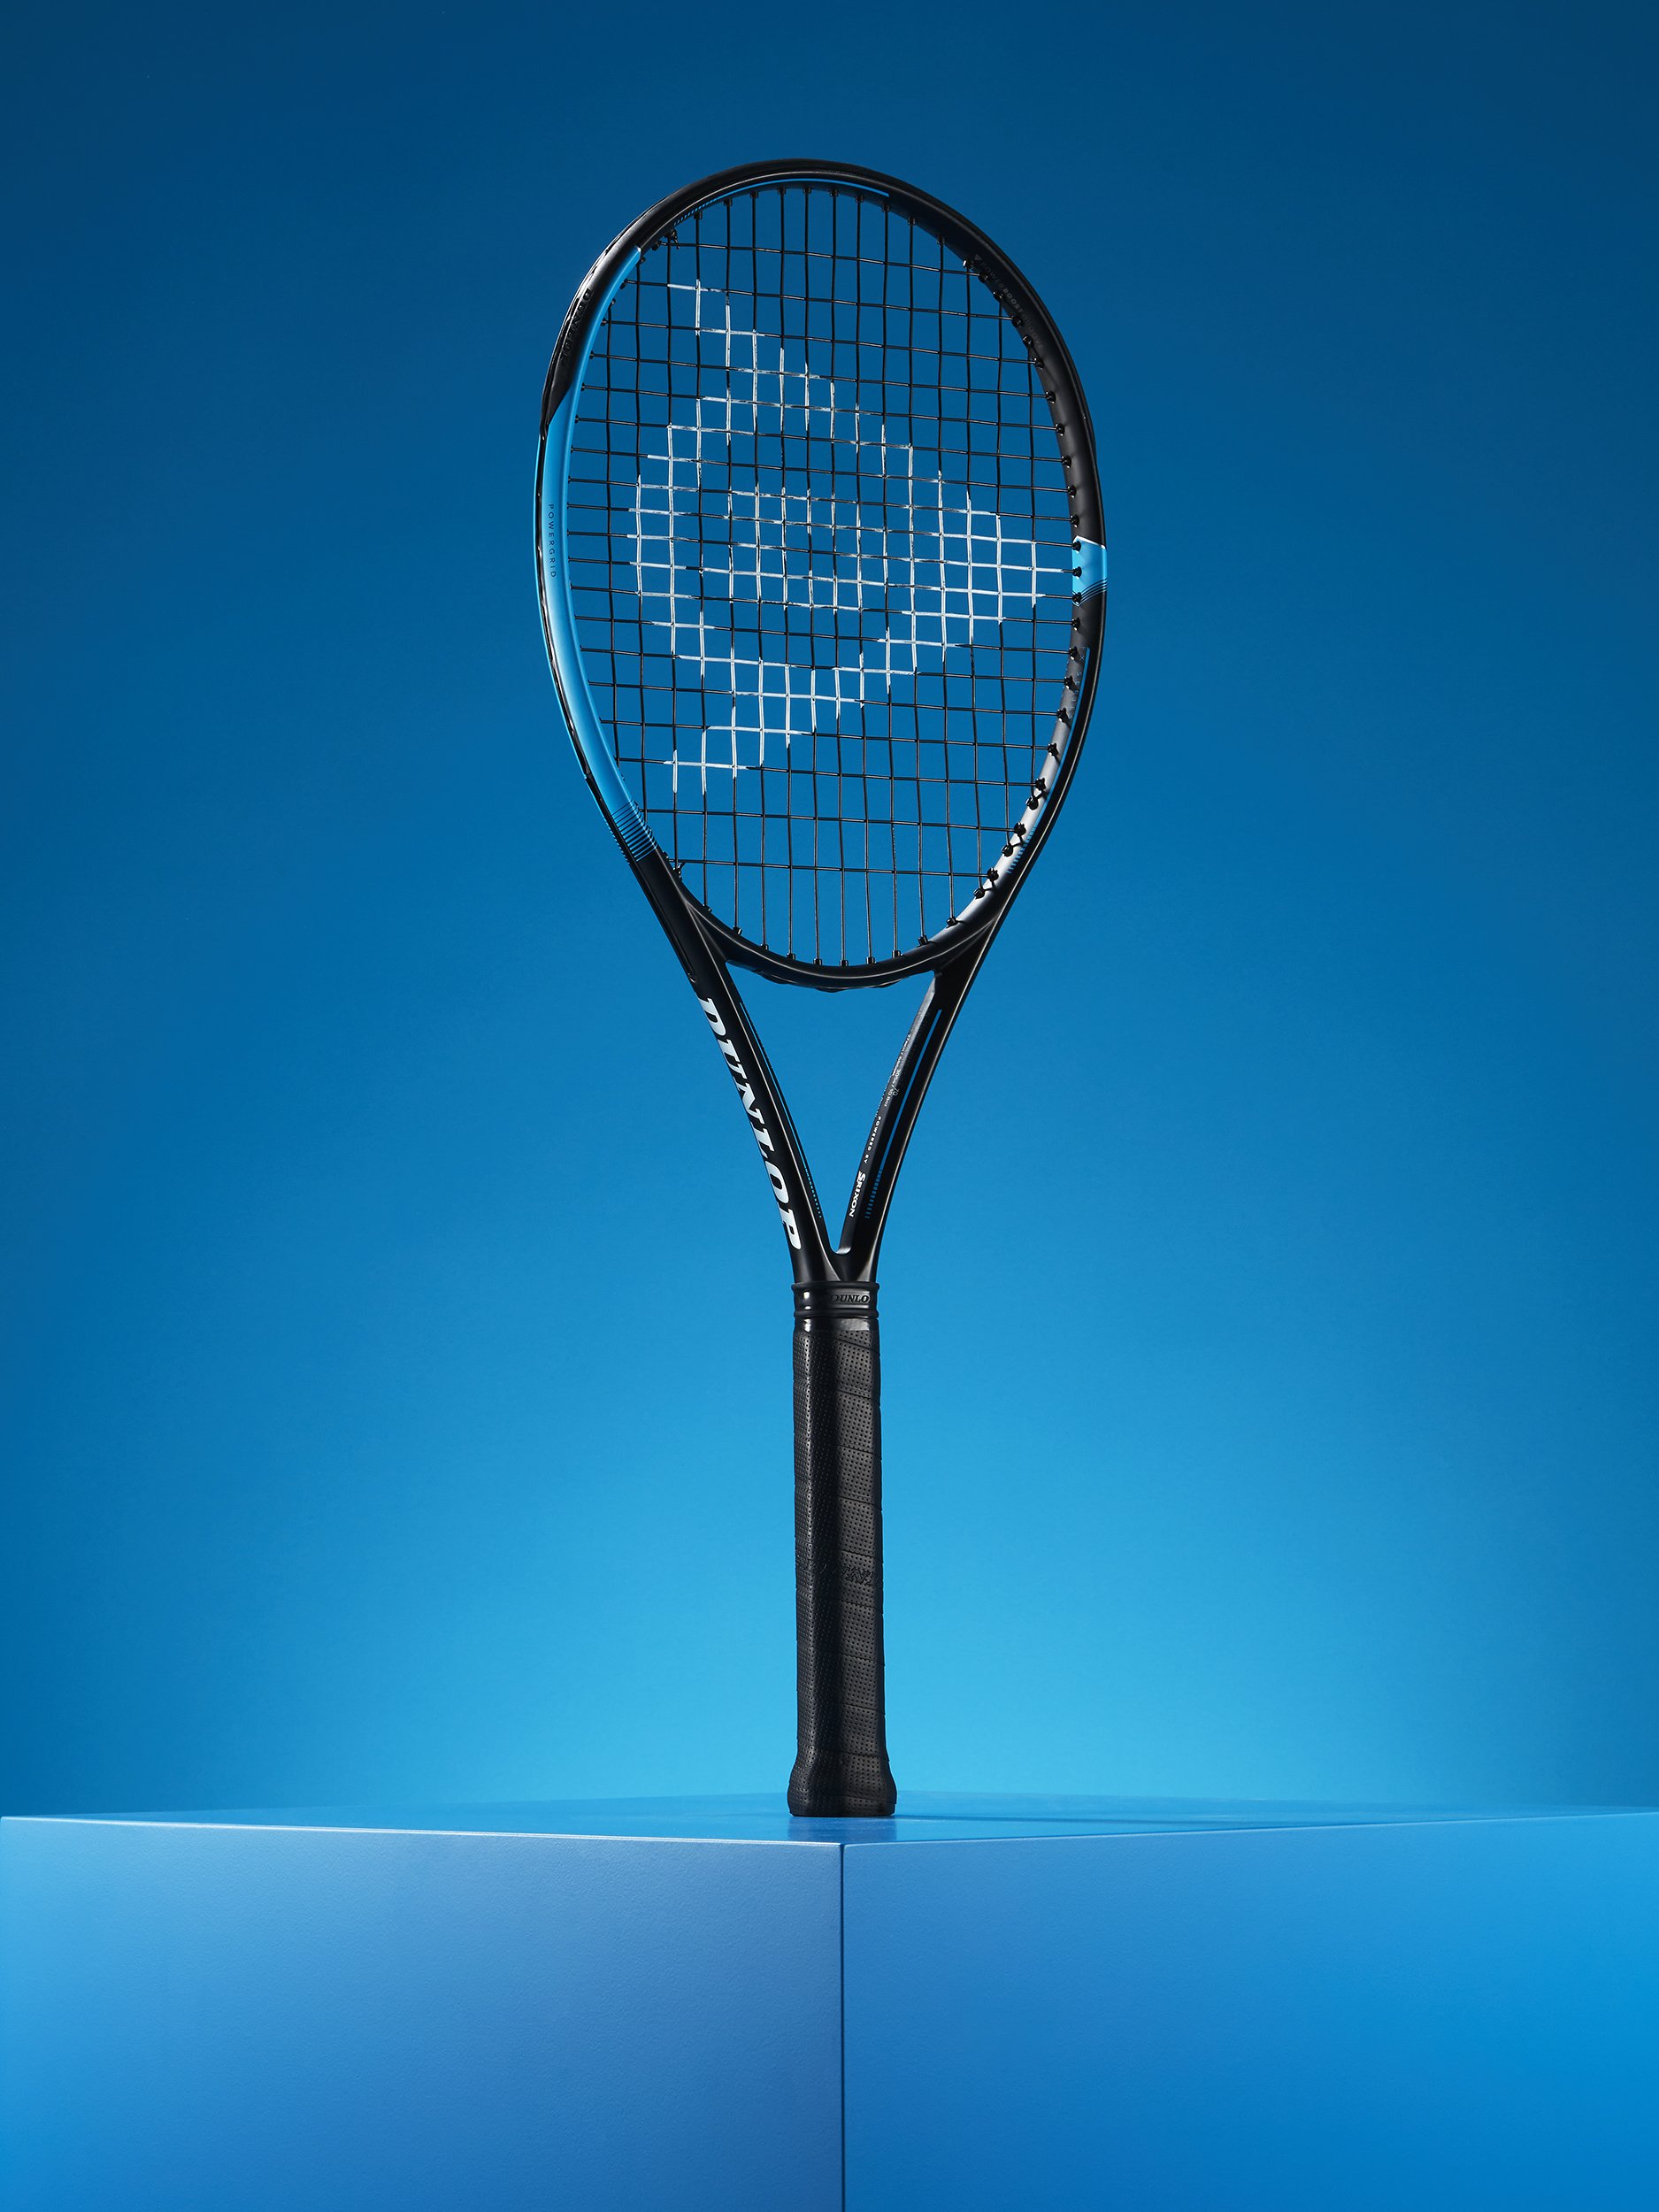 Dunlop FX Racket - Product photography by Simon Lyle Ritchie